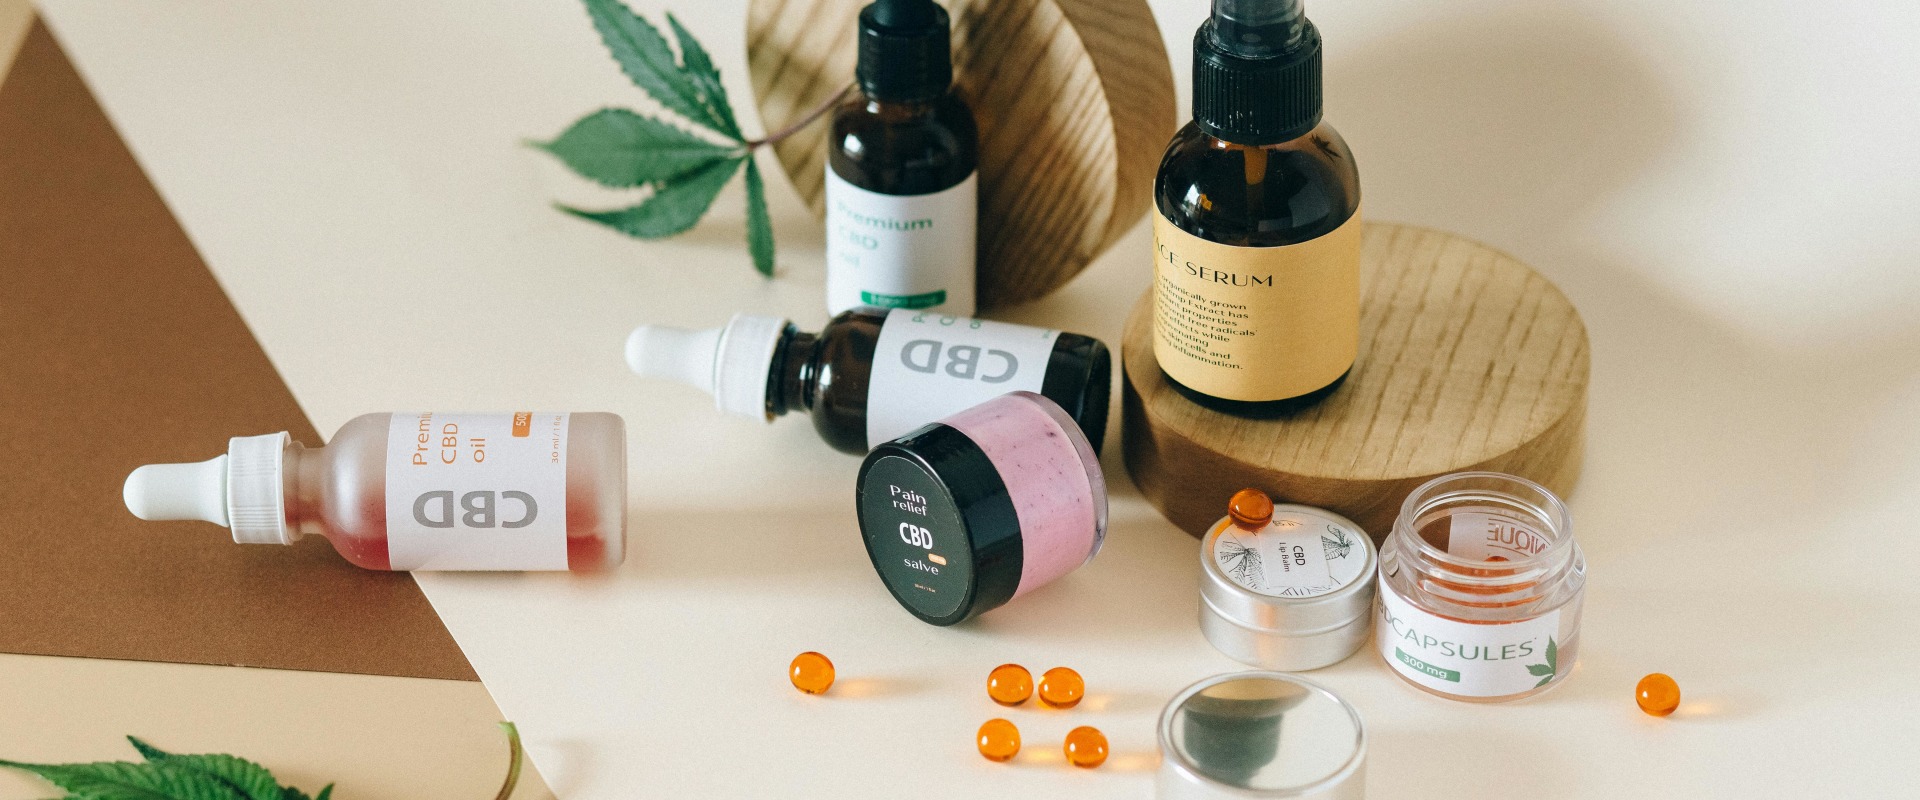 The Healing Touch: Medicinal CBD Oil's Impact In California